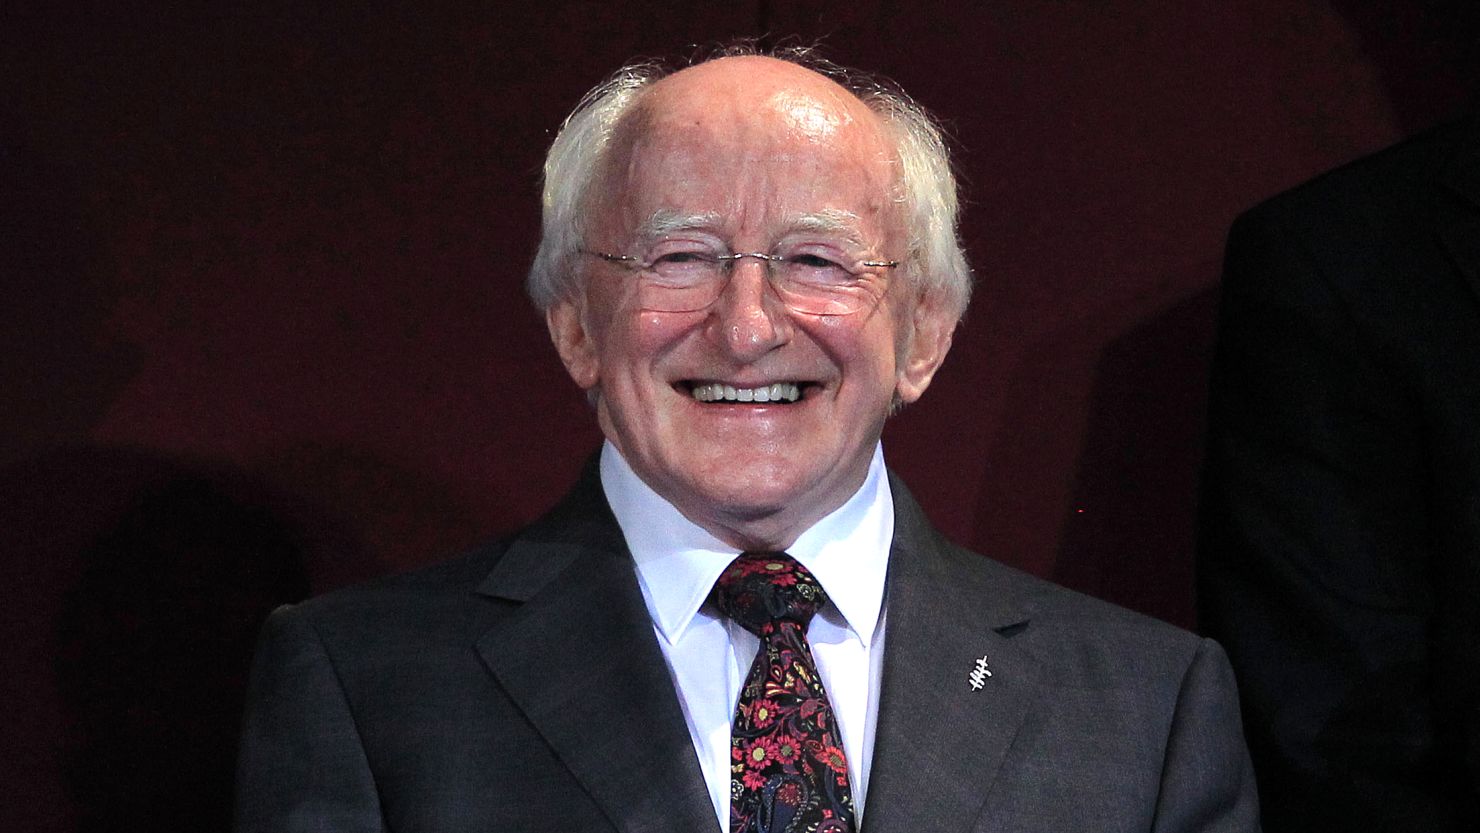 Newly elected Irish President Michael Higgins smiles during the official announcement of the election results.